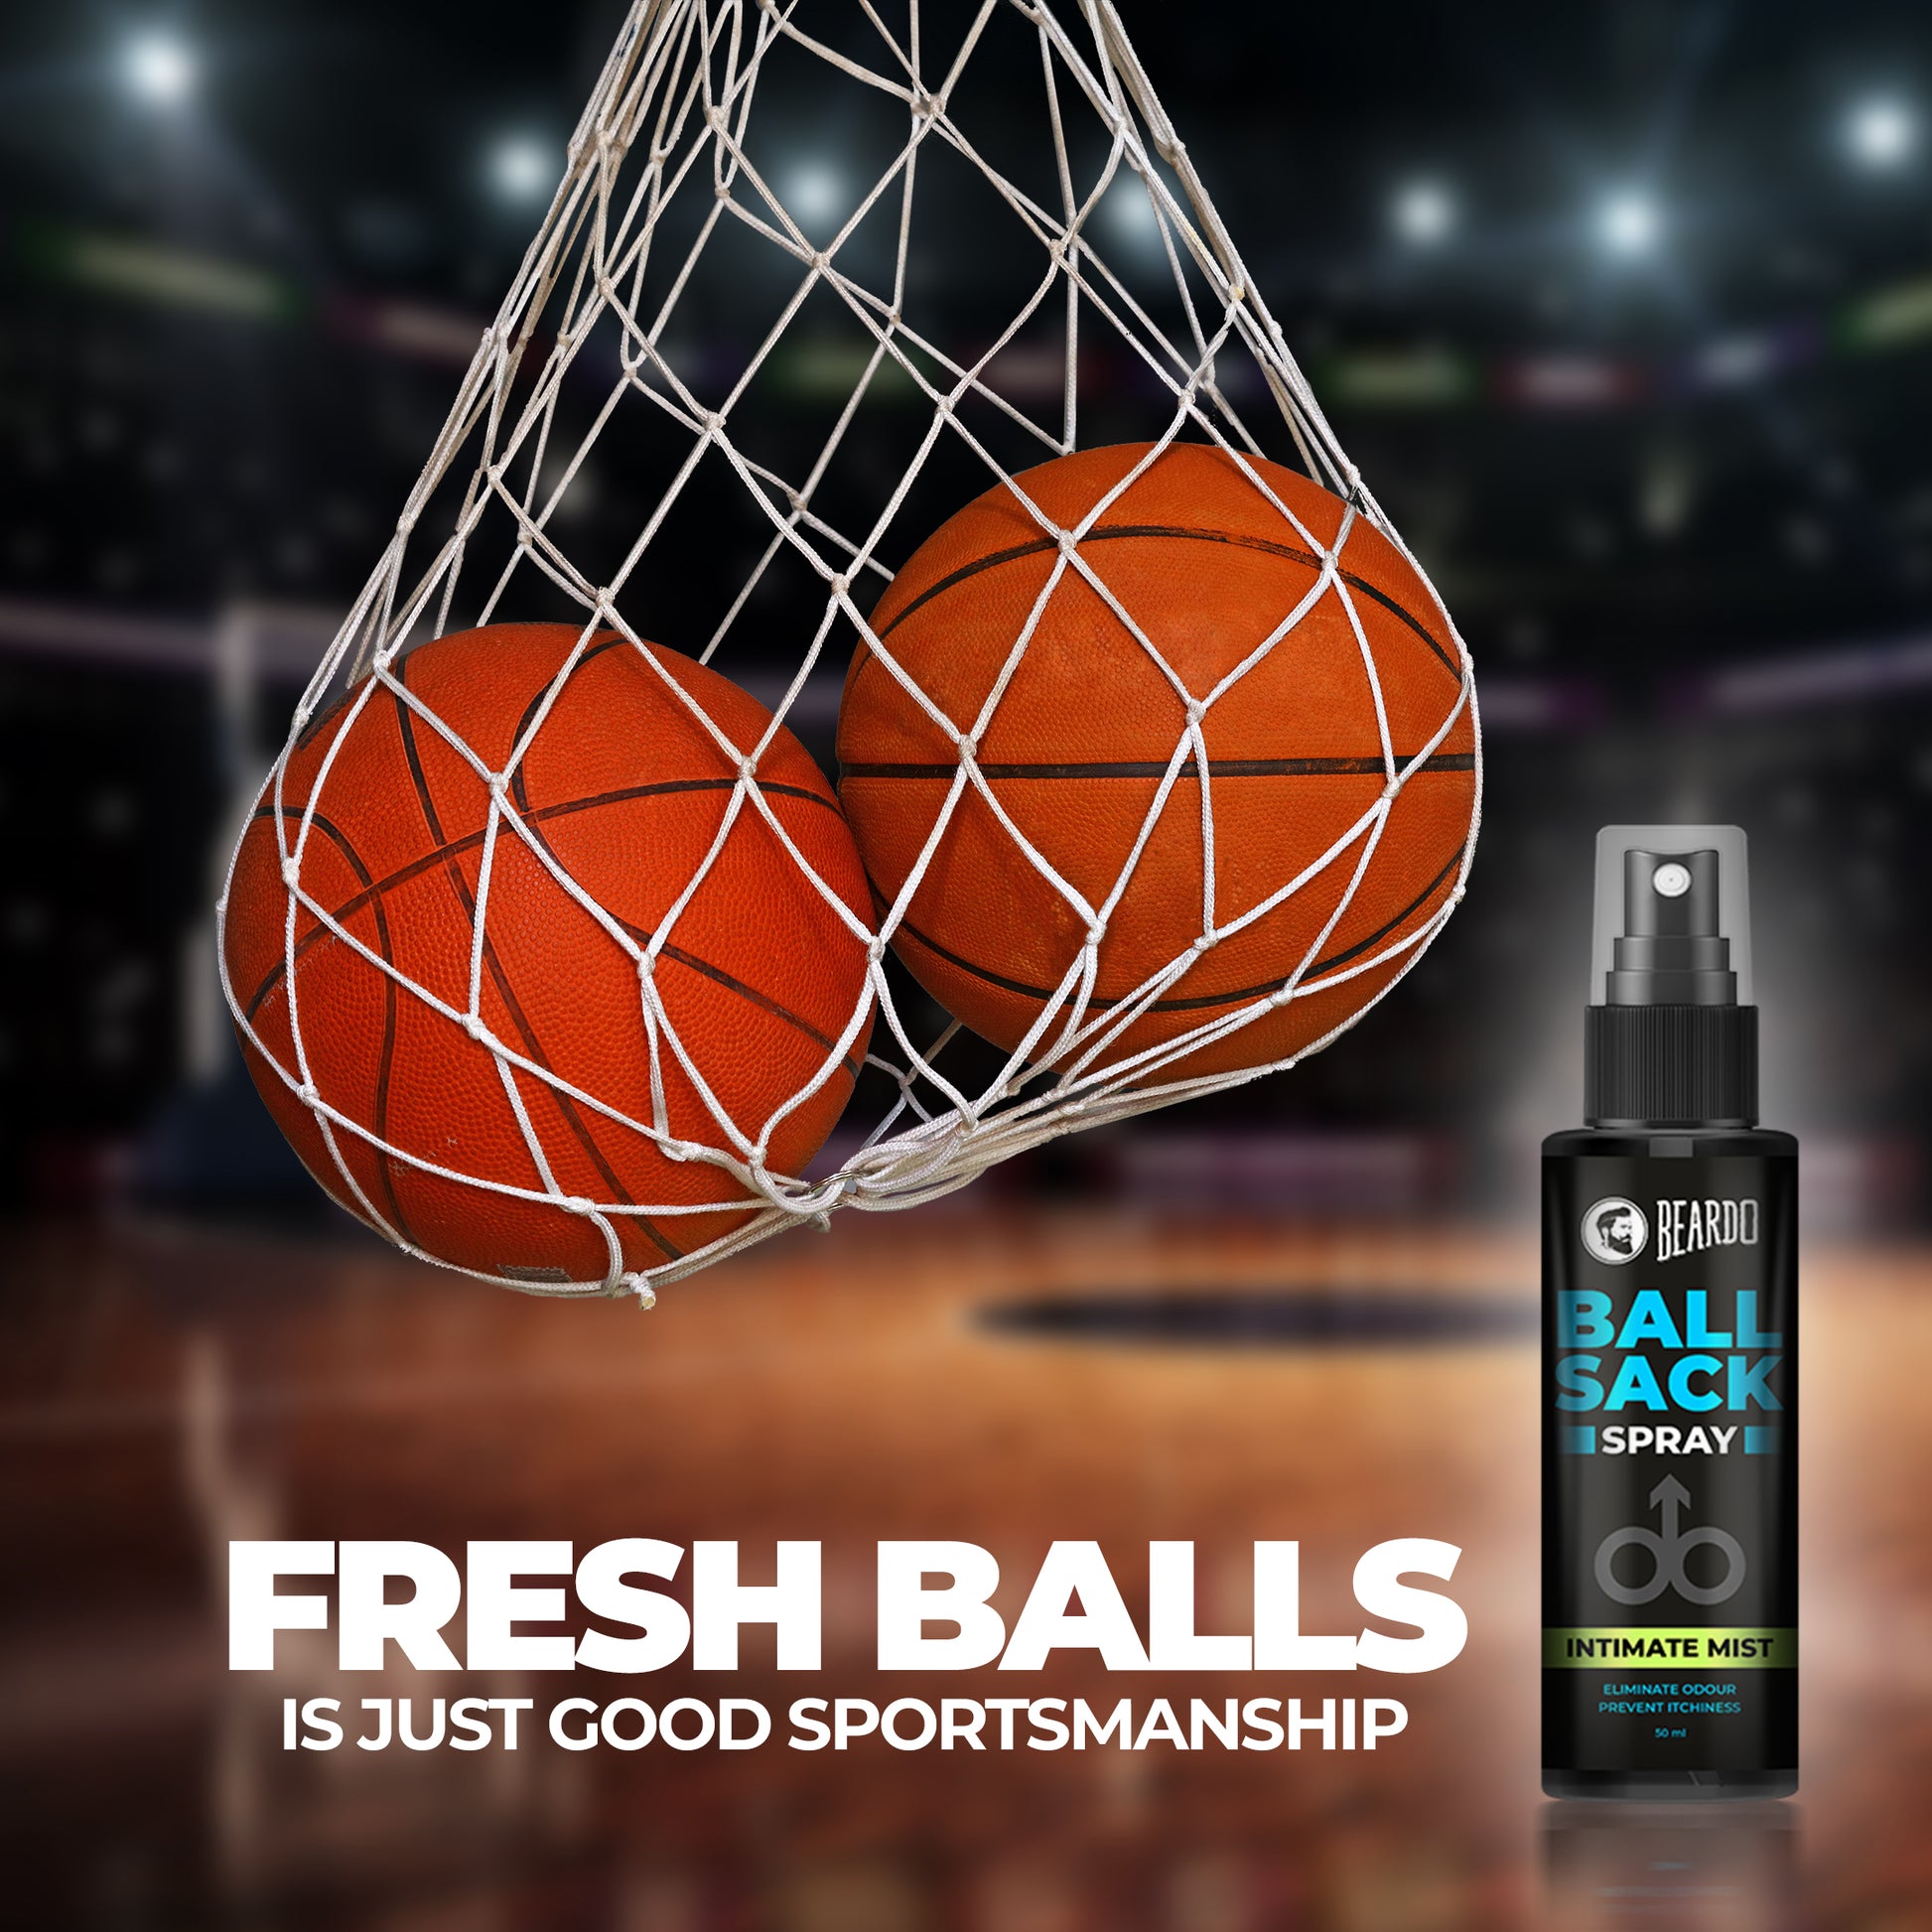 best hygiene products for guys, top male hygiene products, fresh dry balls, mens personal hygiene